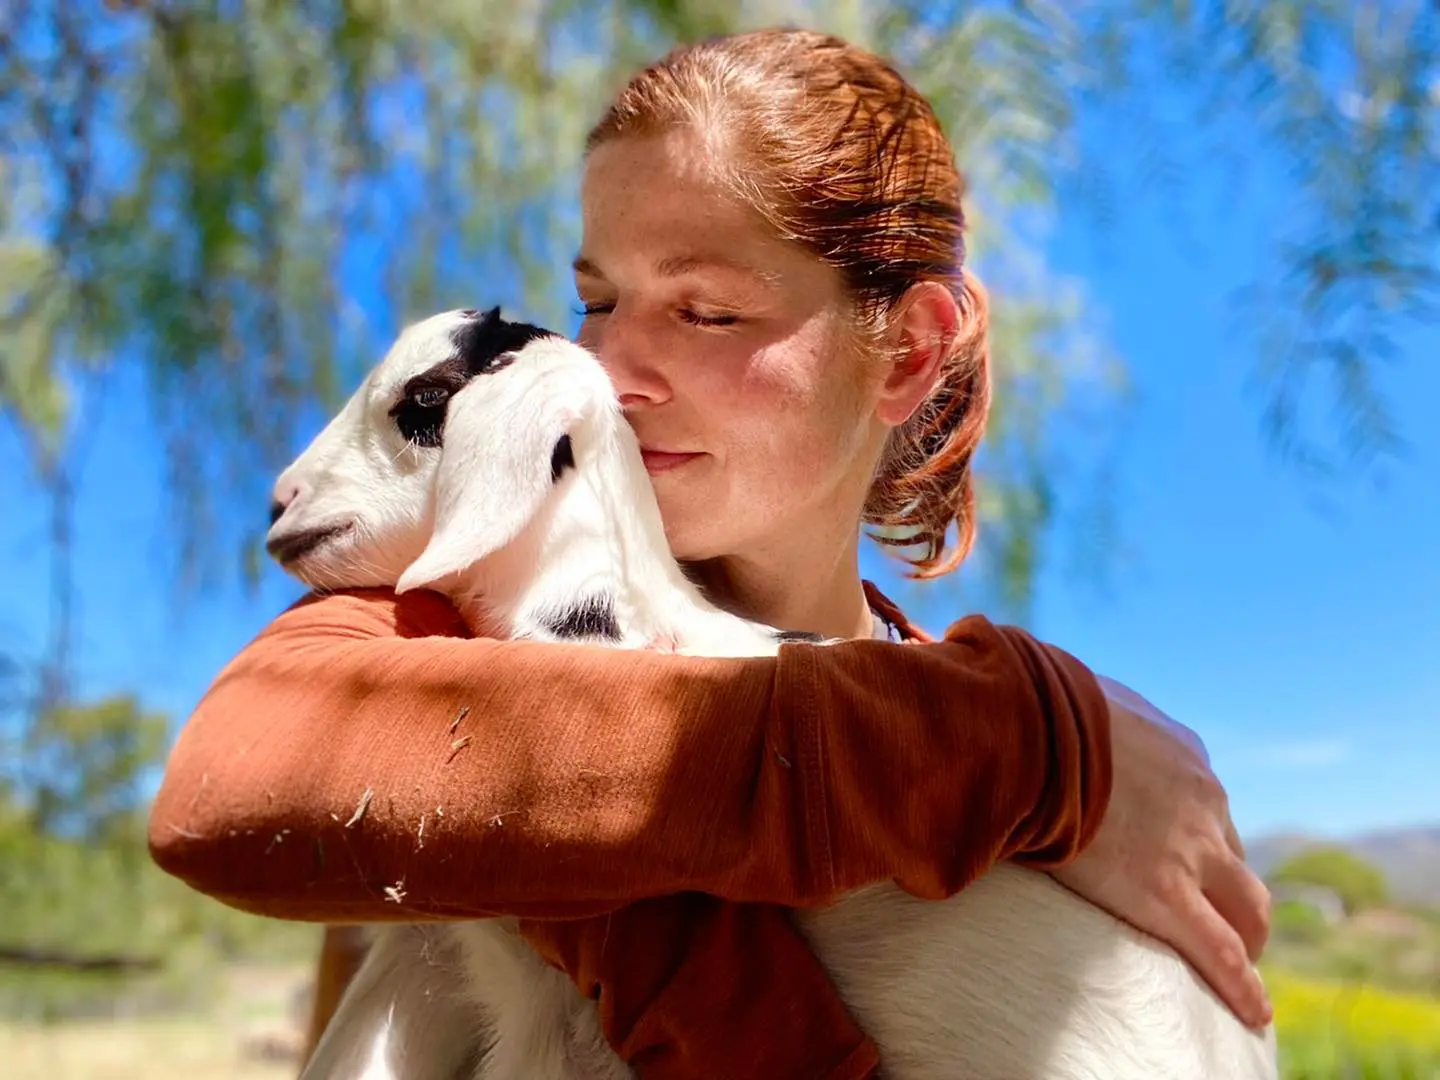 A woman holding a goat in her arms.